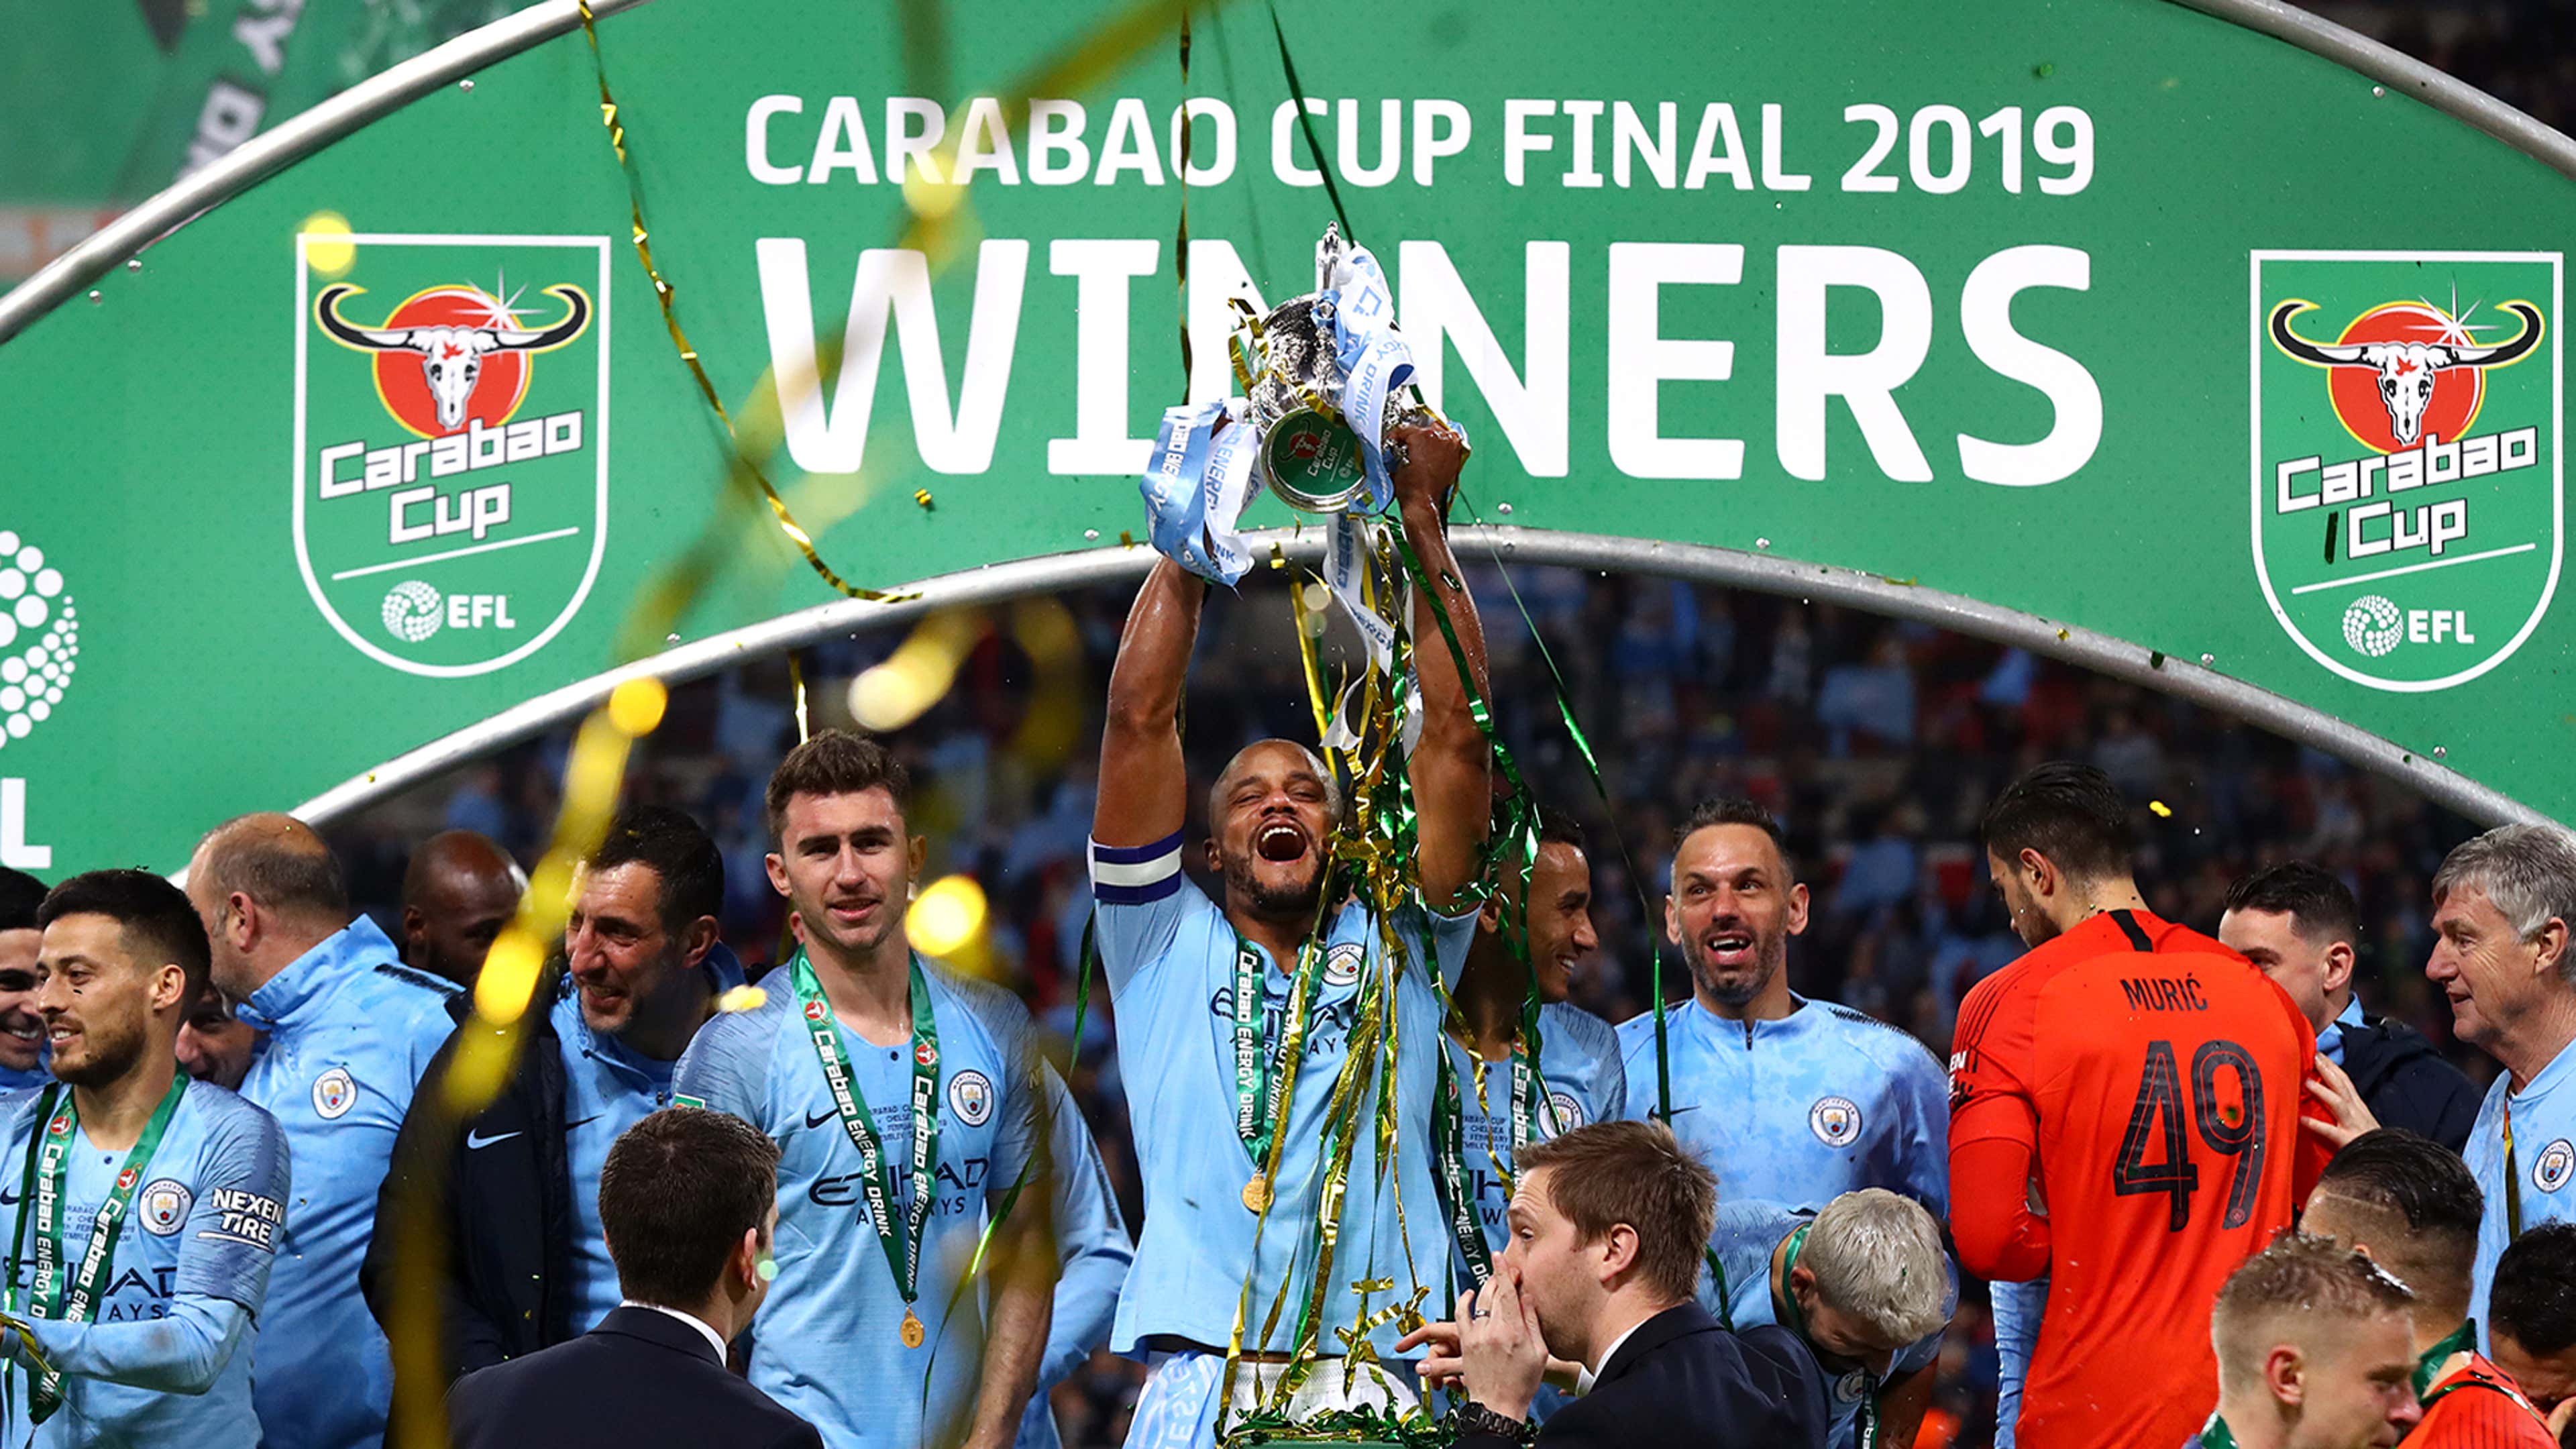 Carabao Cup 2018-19: Fixtures, teams, draw dates & all you need to